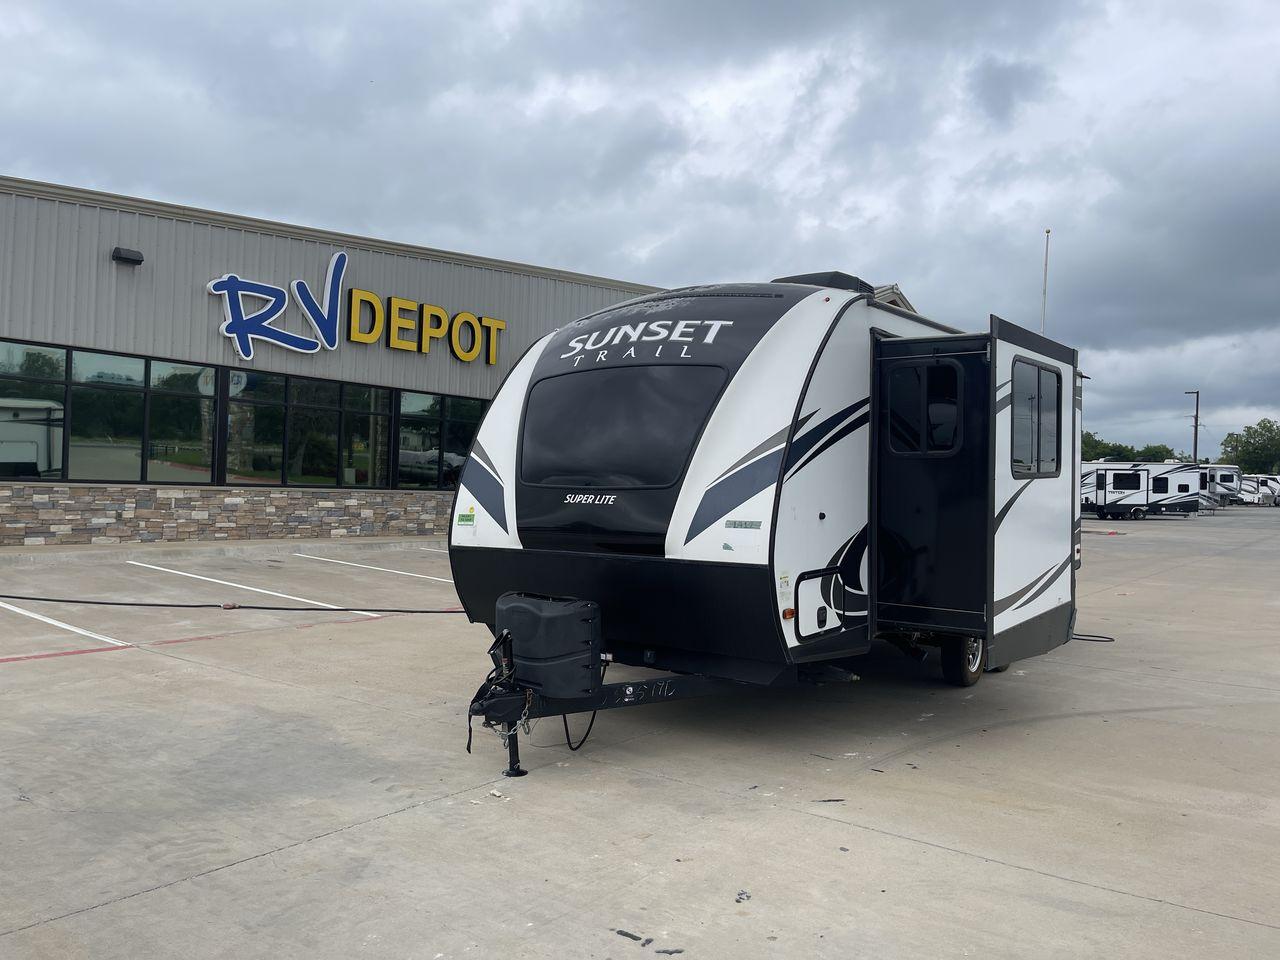 2018 KEYSTONE SUNSET TRAIL 210FK (4YDT21029J5) , Length: 25.92 ft. | Dry Weight: 4,696 lbs. | Gross Weight: 7,600 lbs. | Slides: 1 transmission, located at 4319 N Main Street, Cleburne, TX, 76033, (817) 221-0660, 32.435829, -97.384178 - With the 2018 Keystone Sunset Trail 210FK Travel Trailer, set out on a journey of comfort and style. This travel trailer provides a well-designed living area for your trips, making it perfect for small families or couples. The dimensions of this unit are 25.92 ft in length, 8 ft in width, and 11. - Photo #1